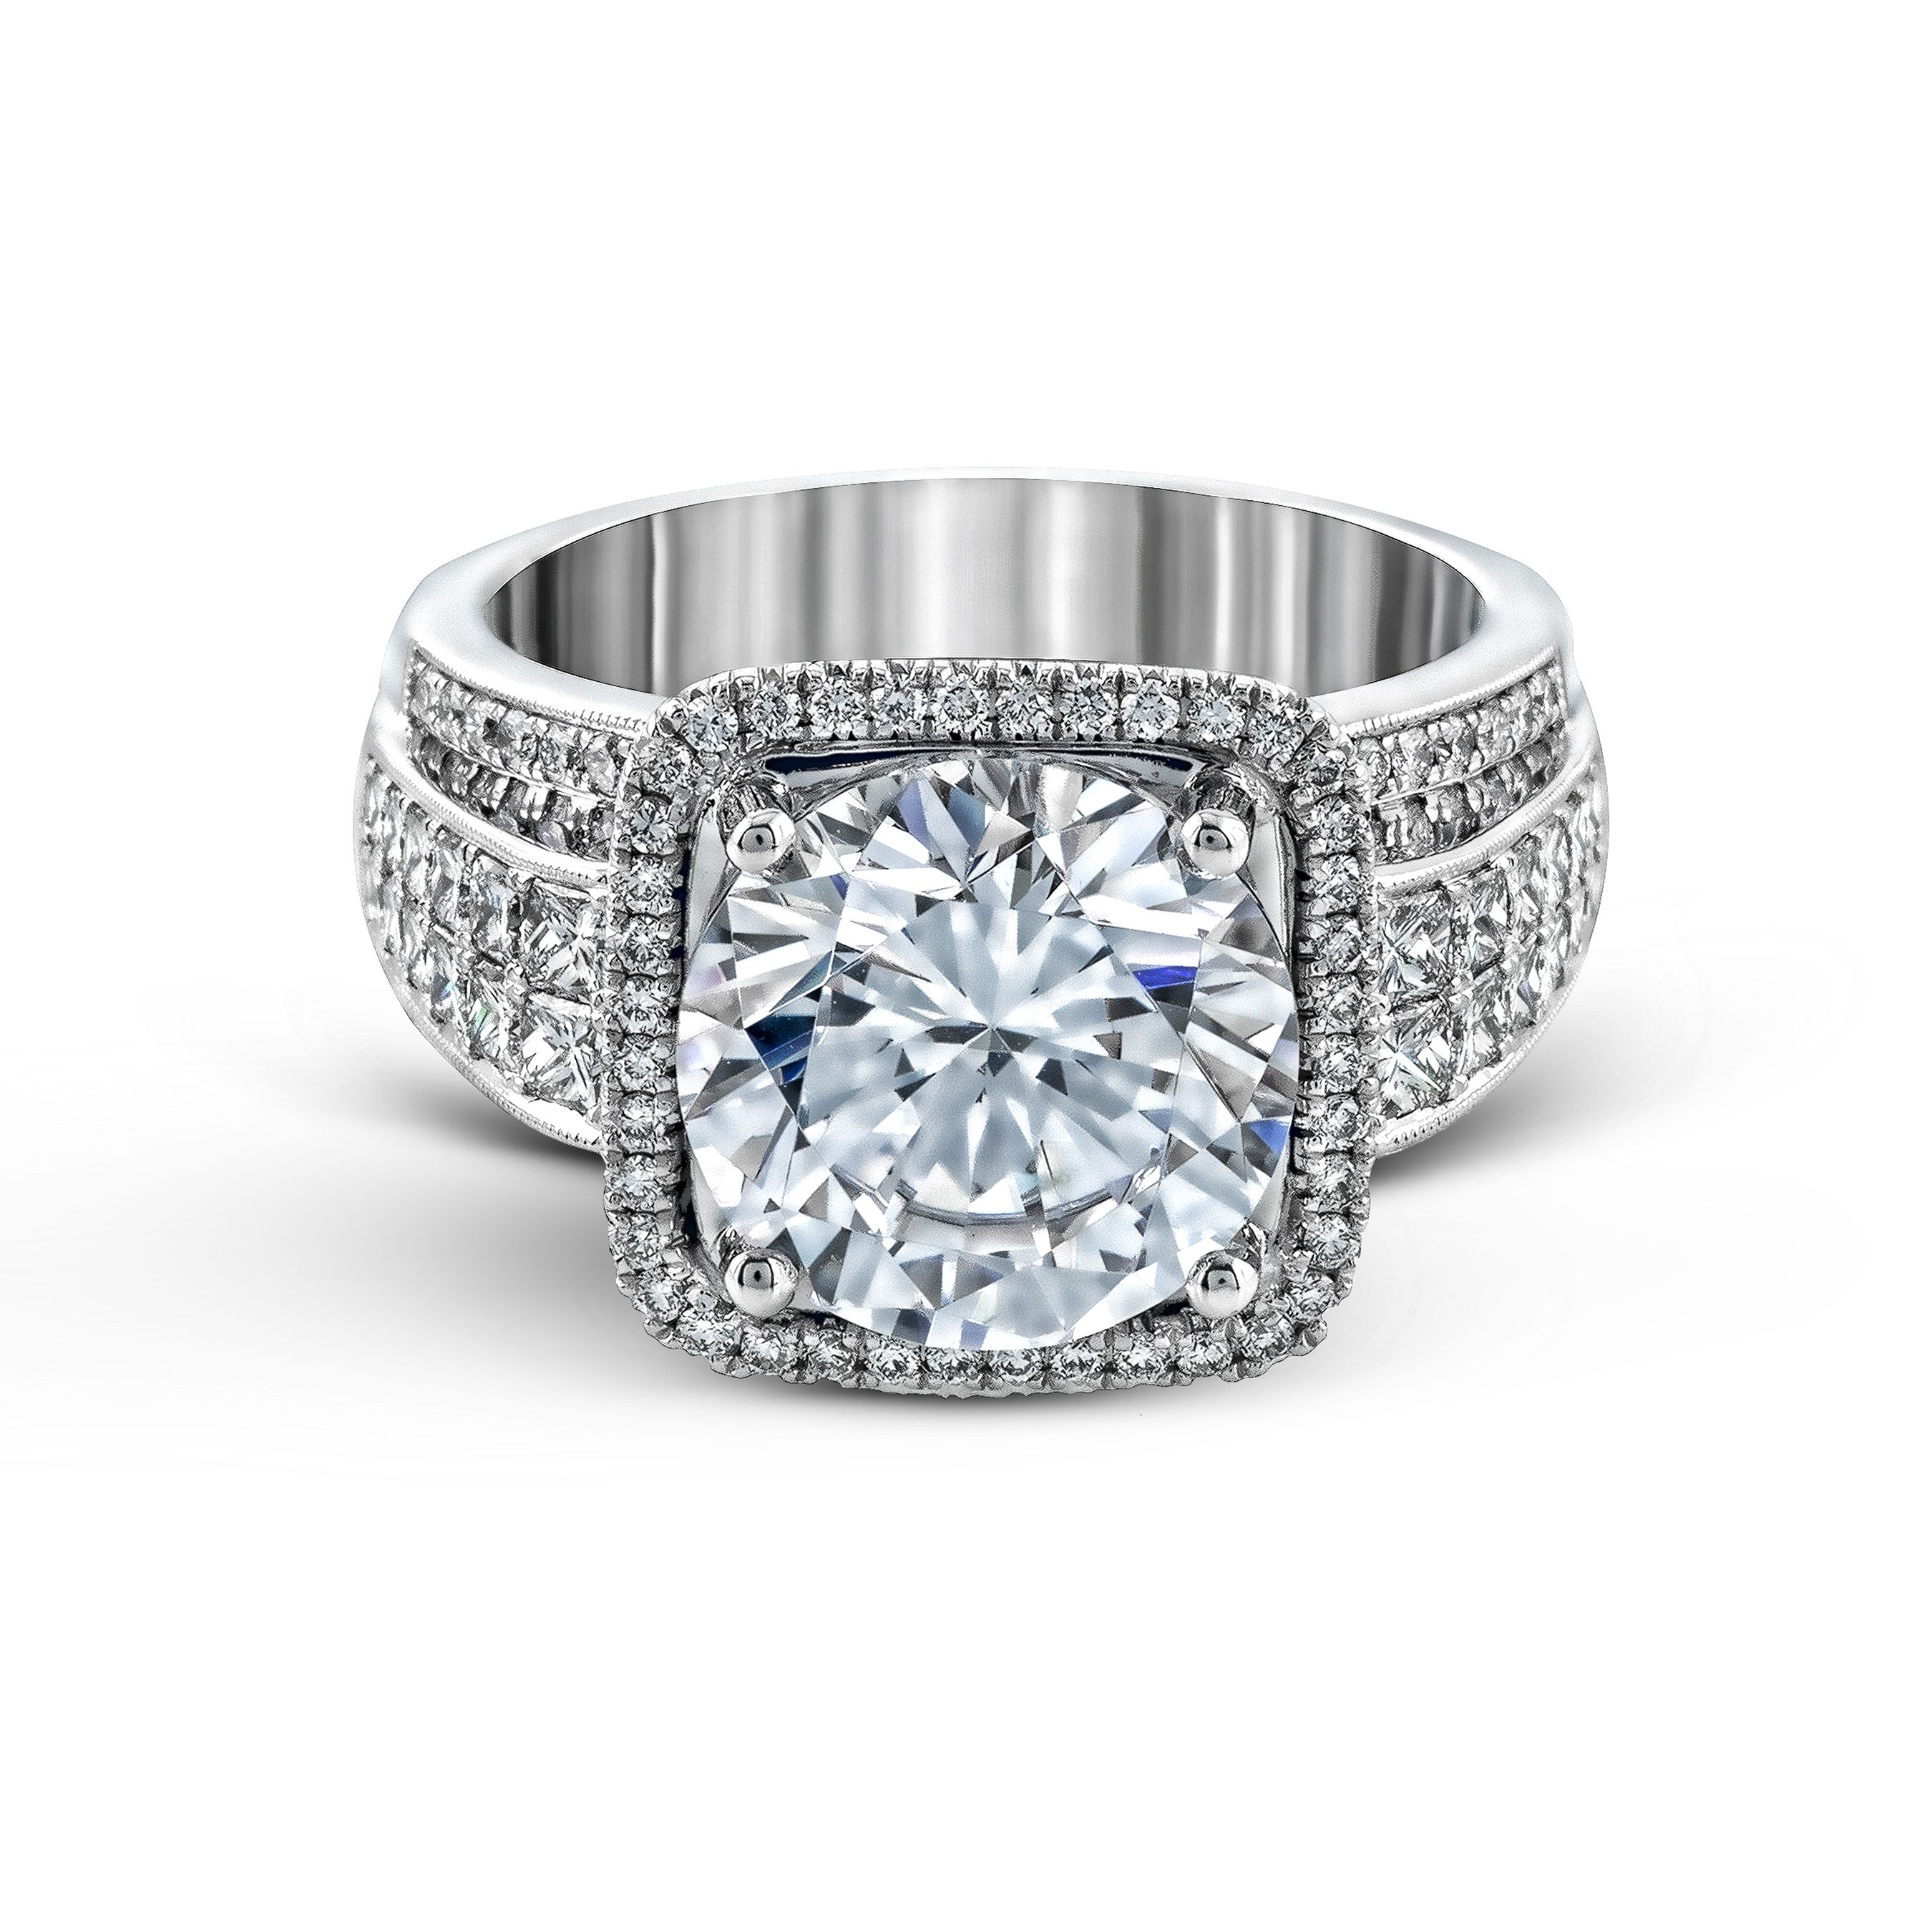 MR2097 Nocturnal Sophistication Collection White Gold Round Cut Engagement Ring